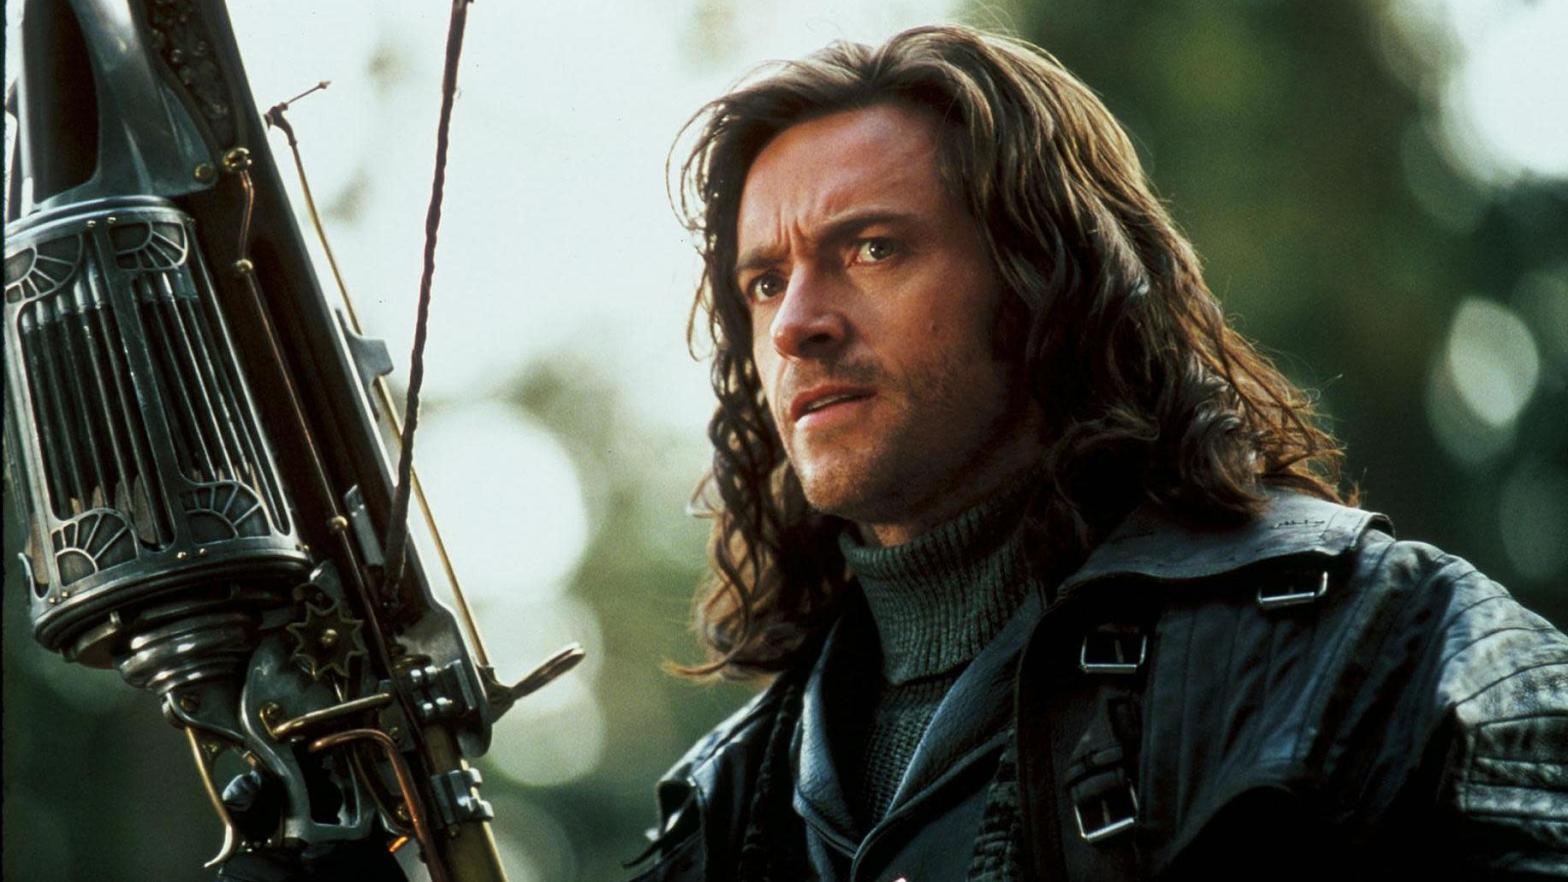 Hugh Jackman  (and wig) as Van Helsing in 2004's movie of the same name.  (Image: Universal Pictures)